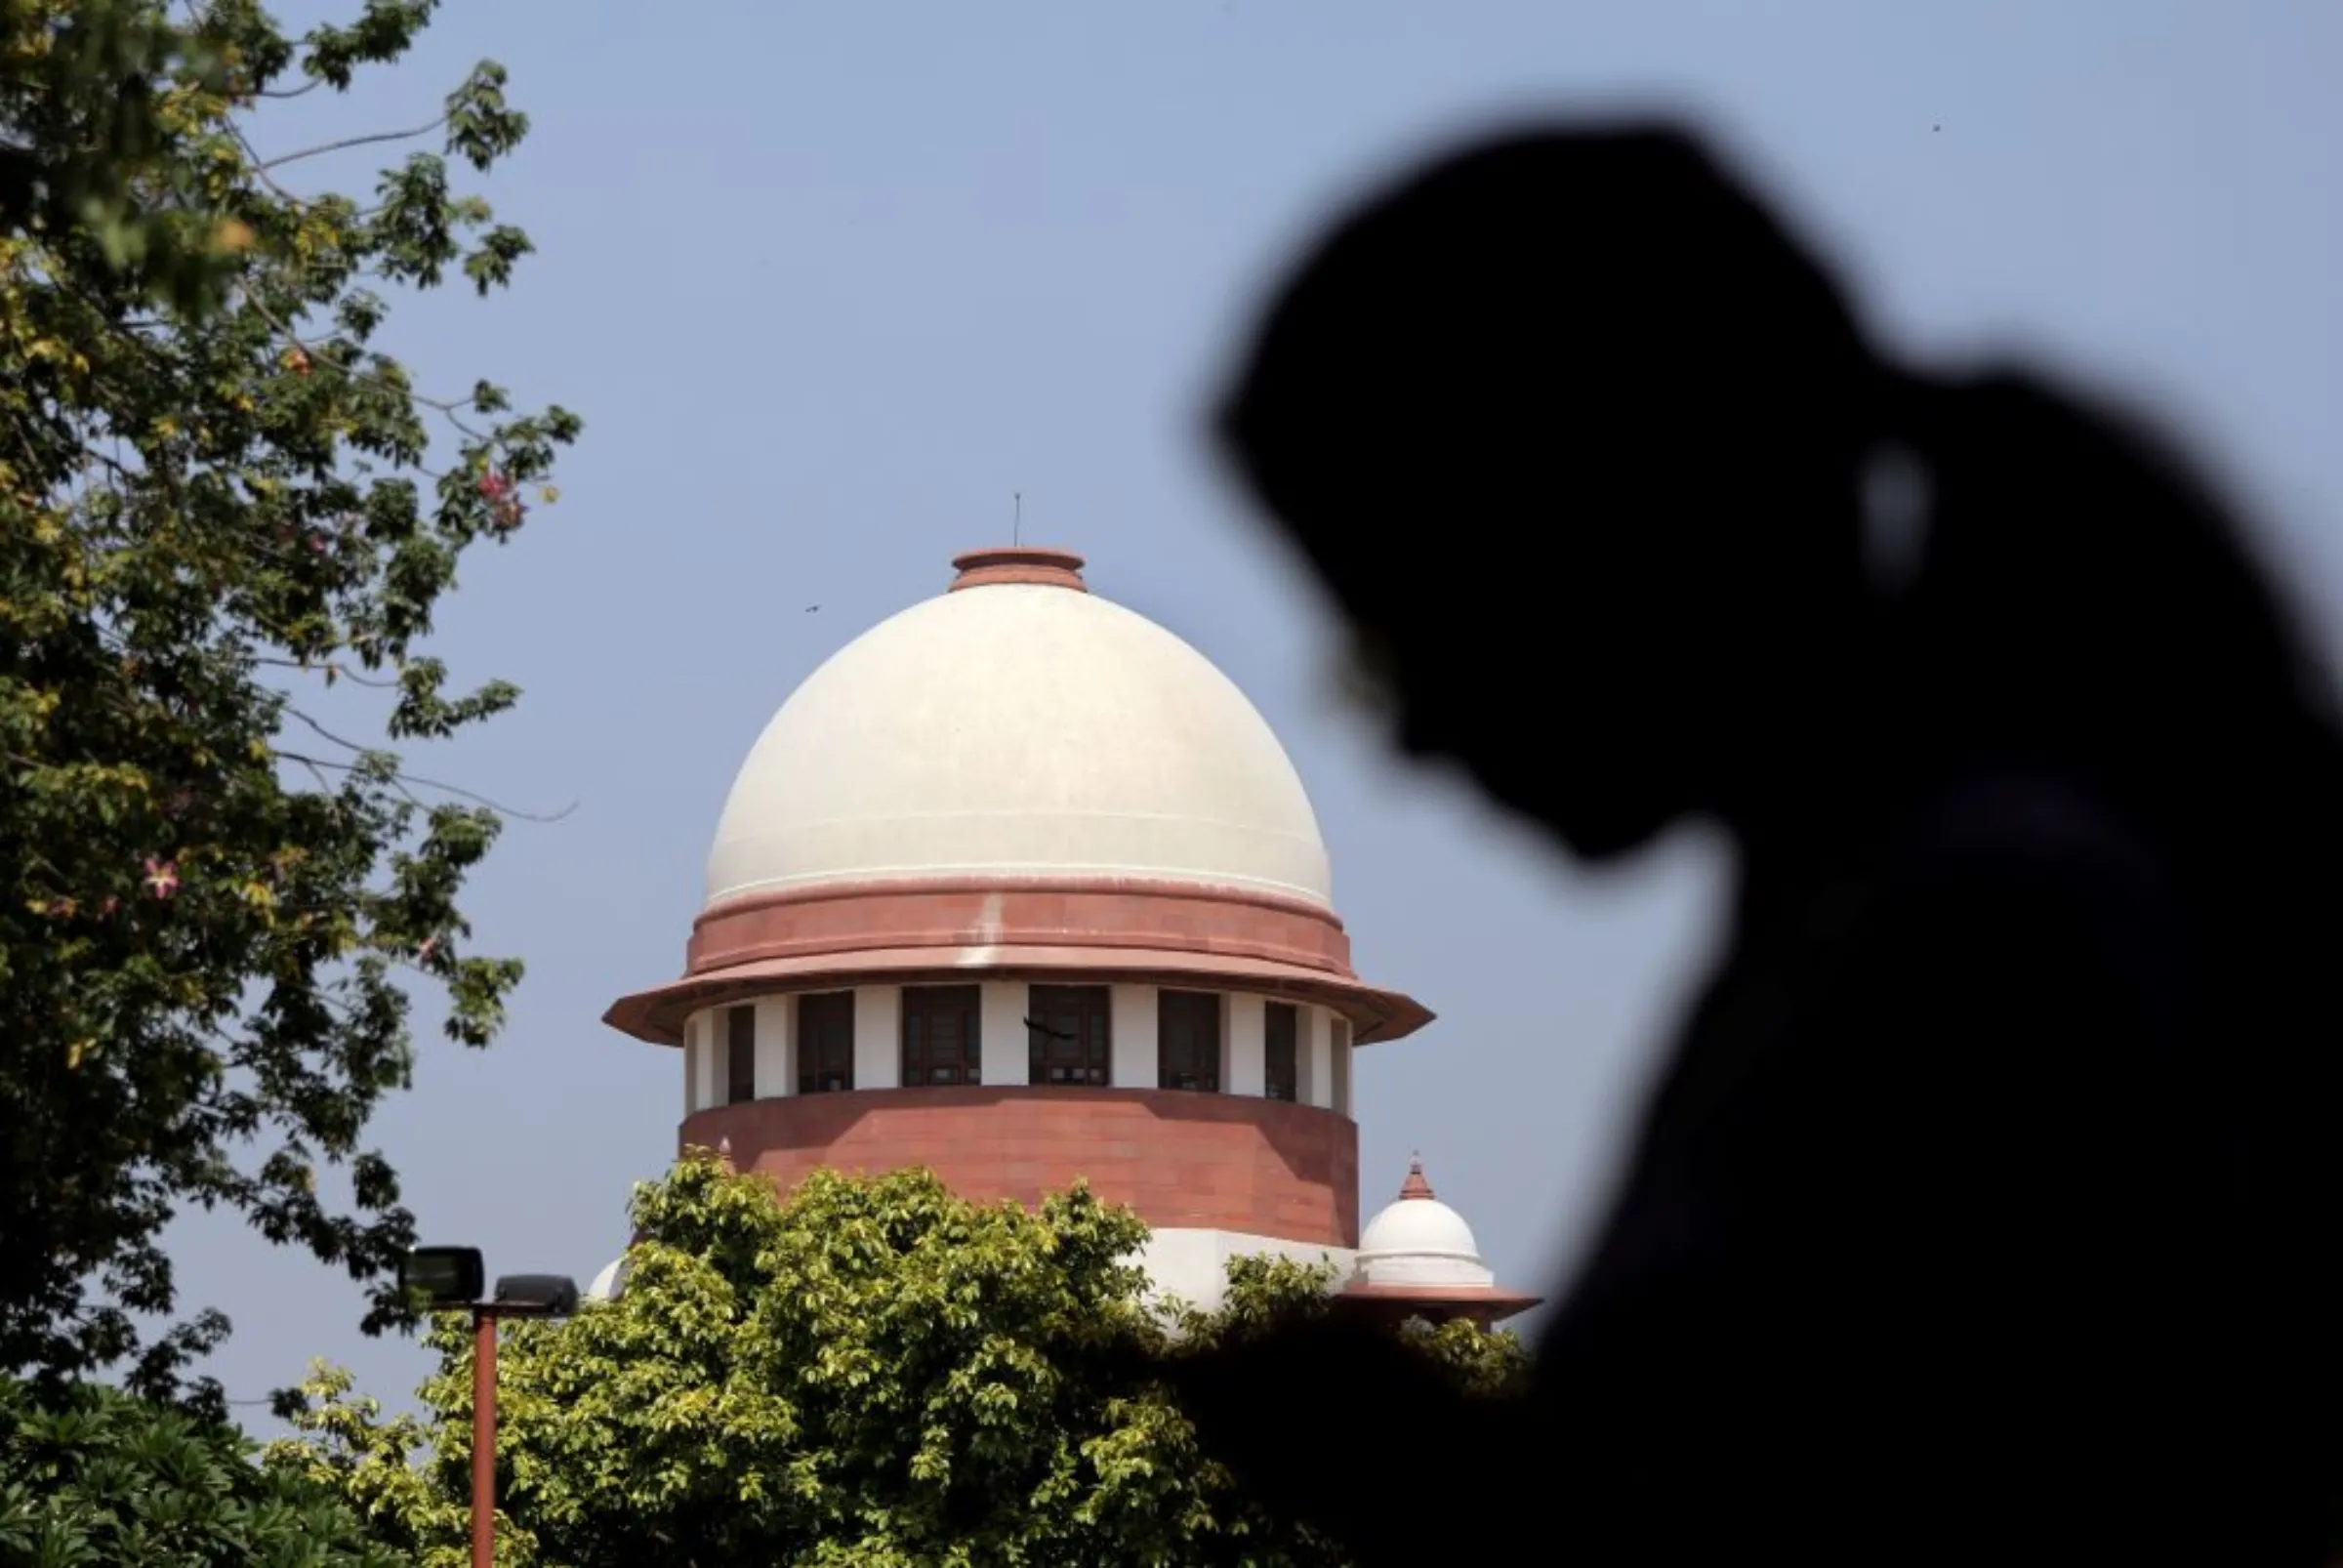 A woman checks her mobile phone inside the premises of the Supreme Court in New Delhi, India, September 28, 2018